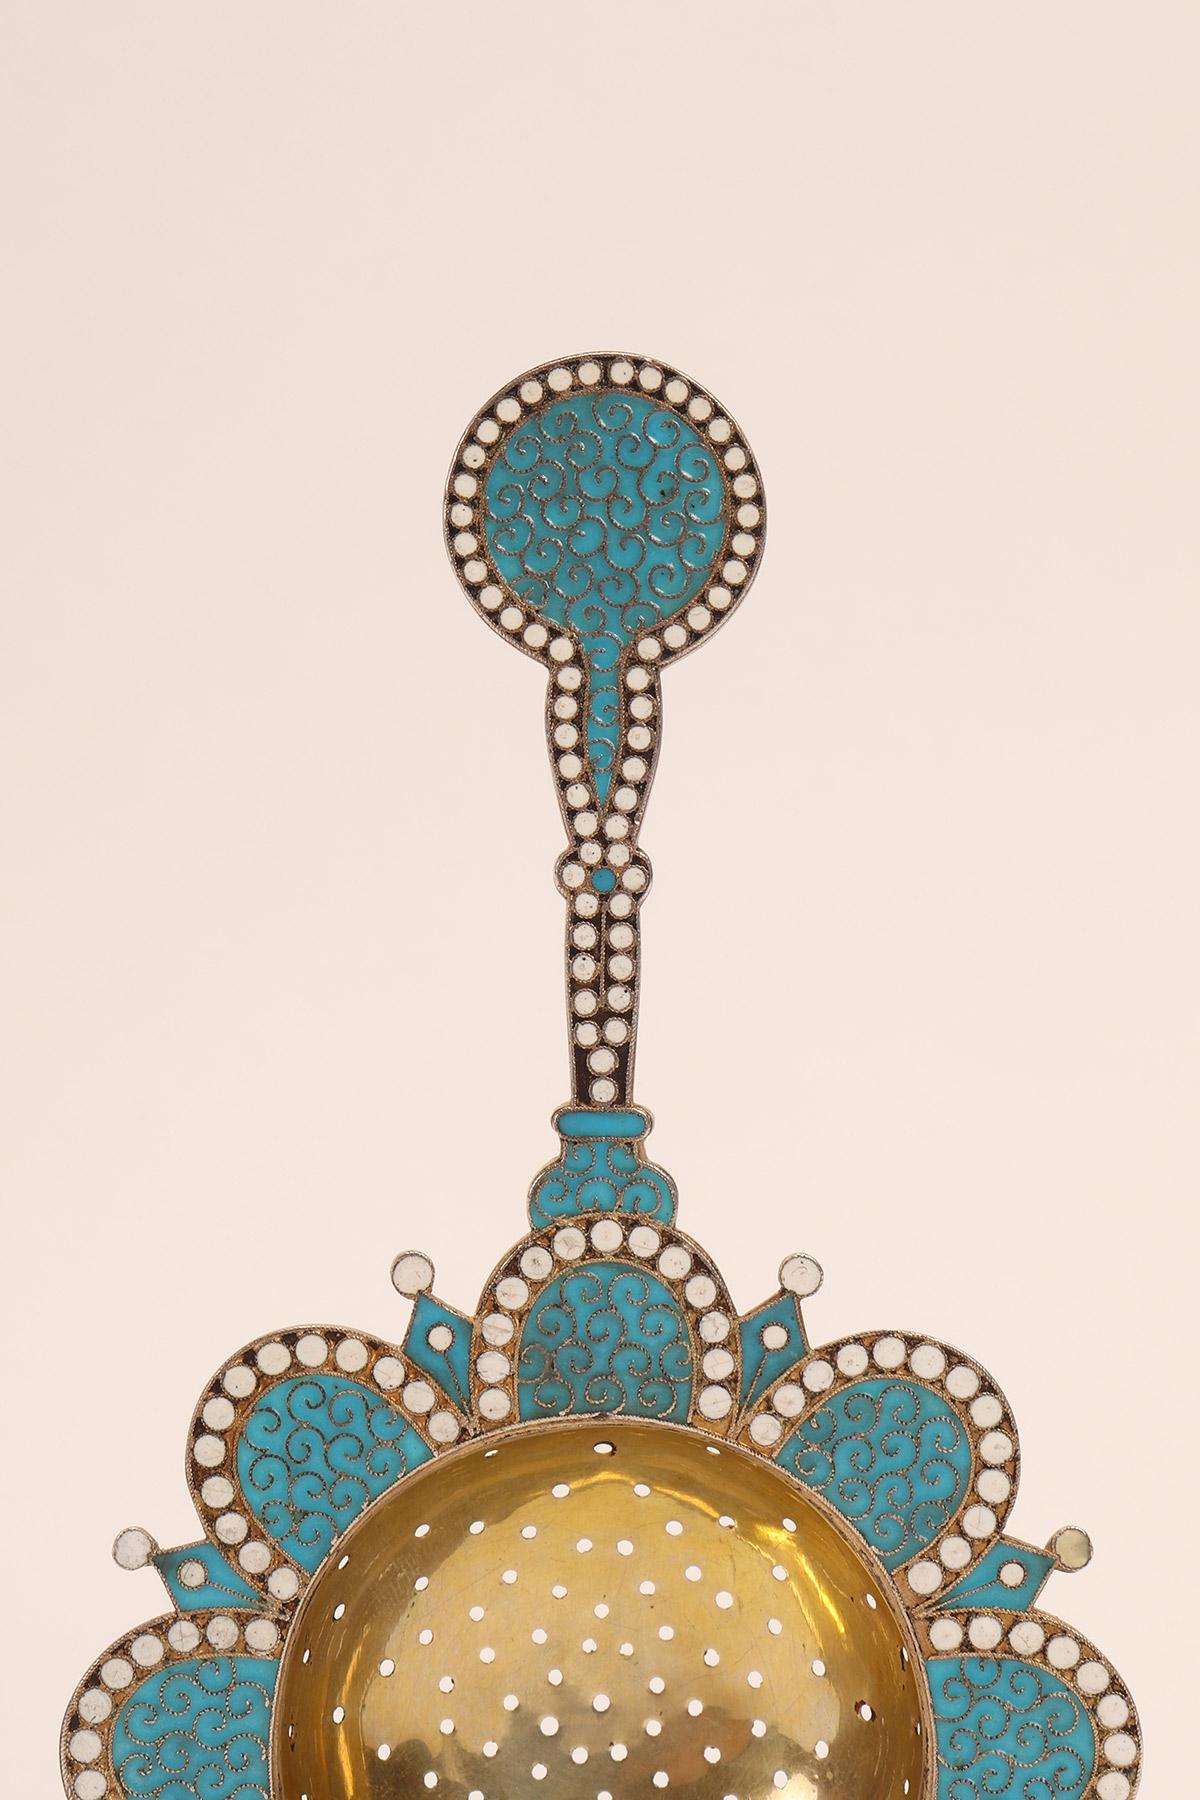 Russian Silver and Enamels Tea Strainer, Moscow, 1896 For Sale